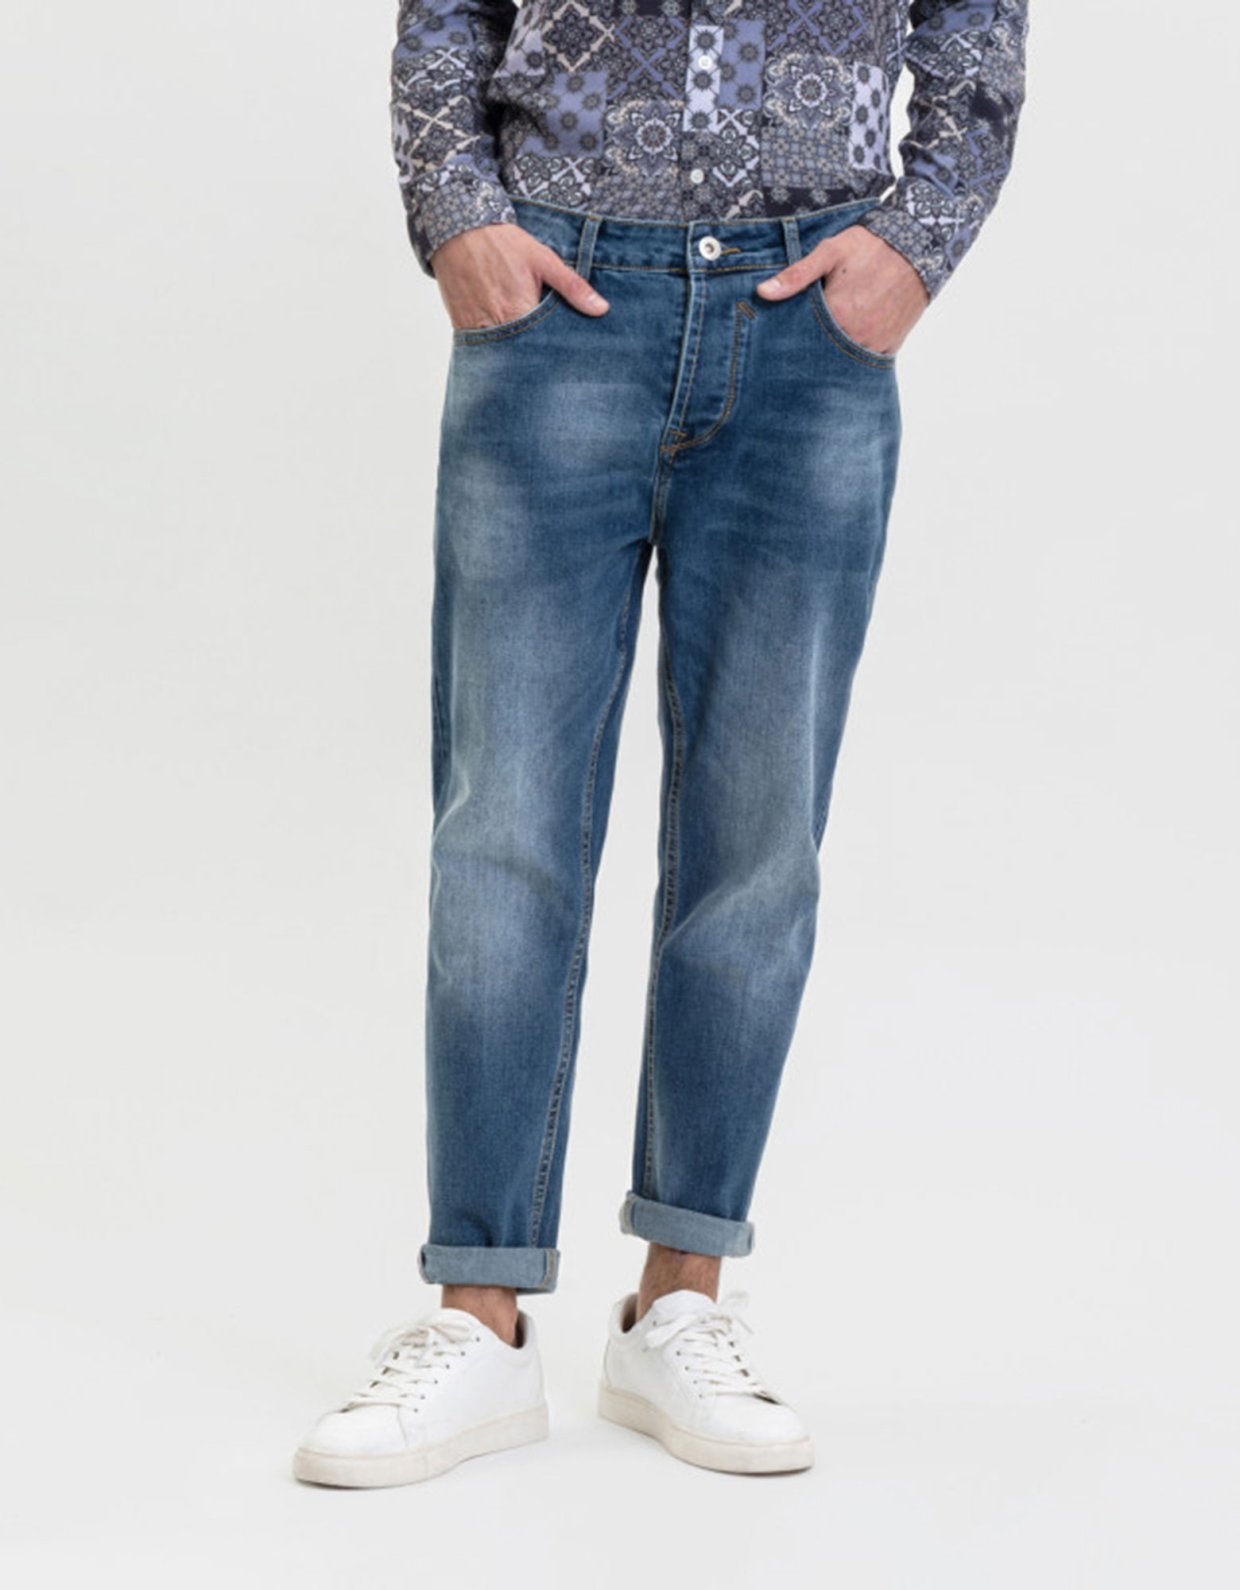 Gianni Lupo Mike carrot cropped fit medium wash jeans